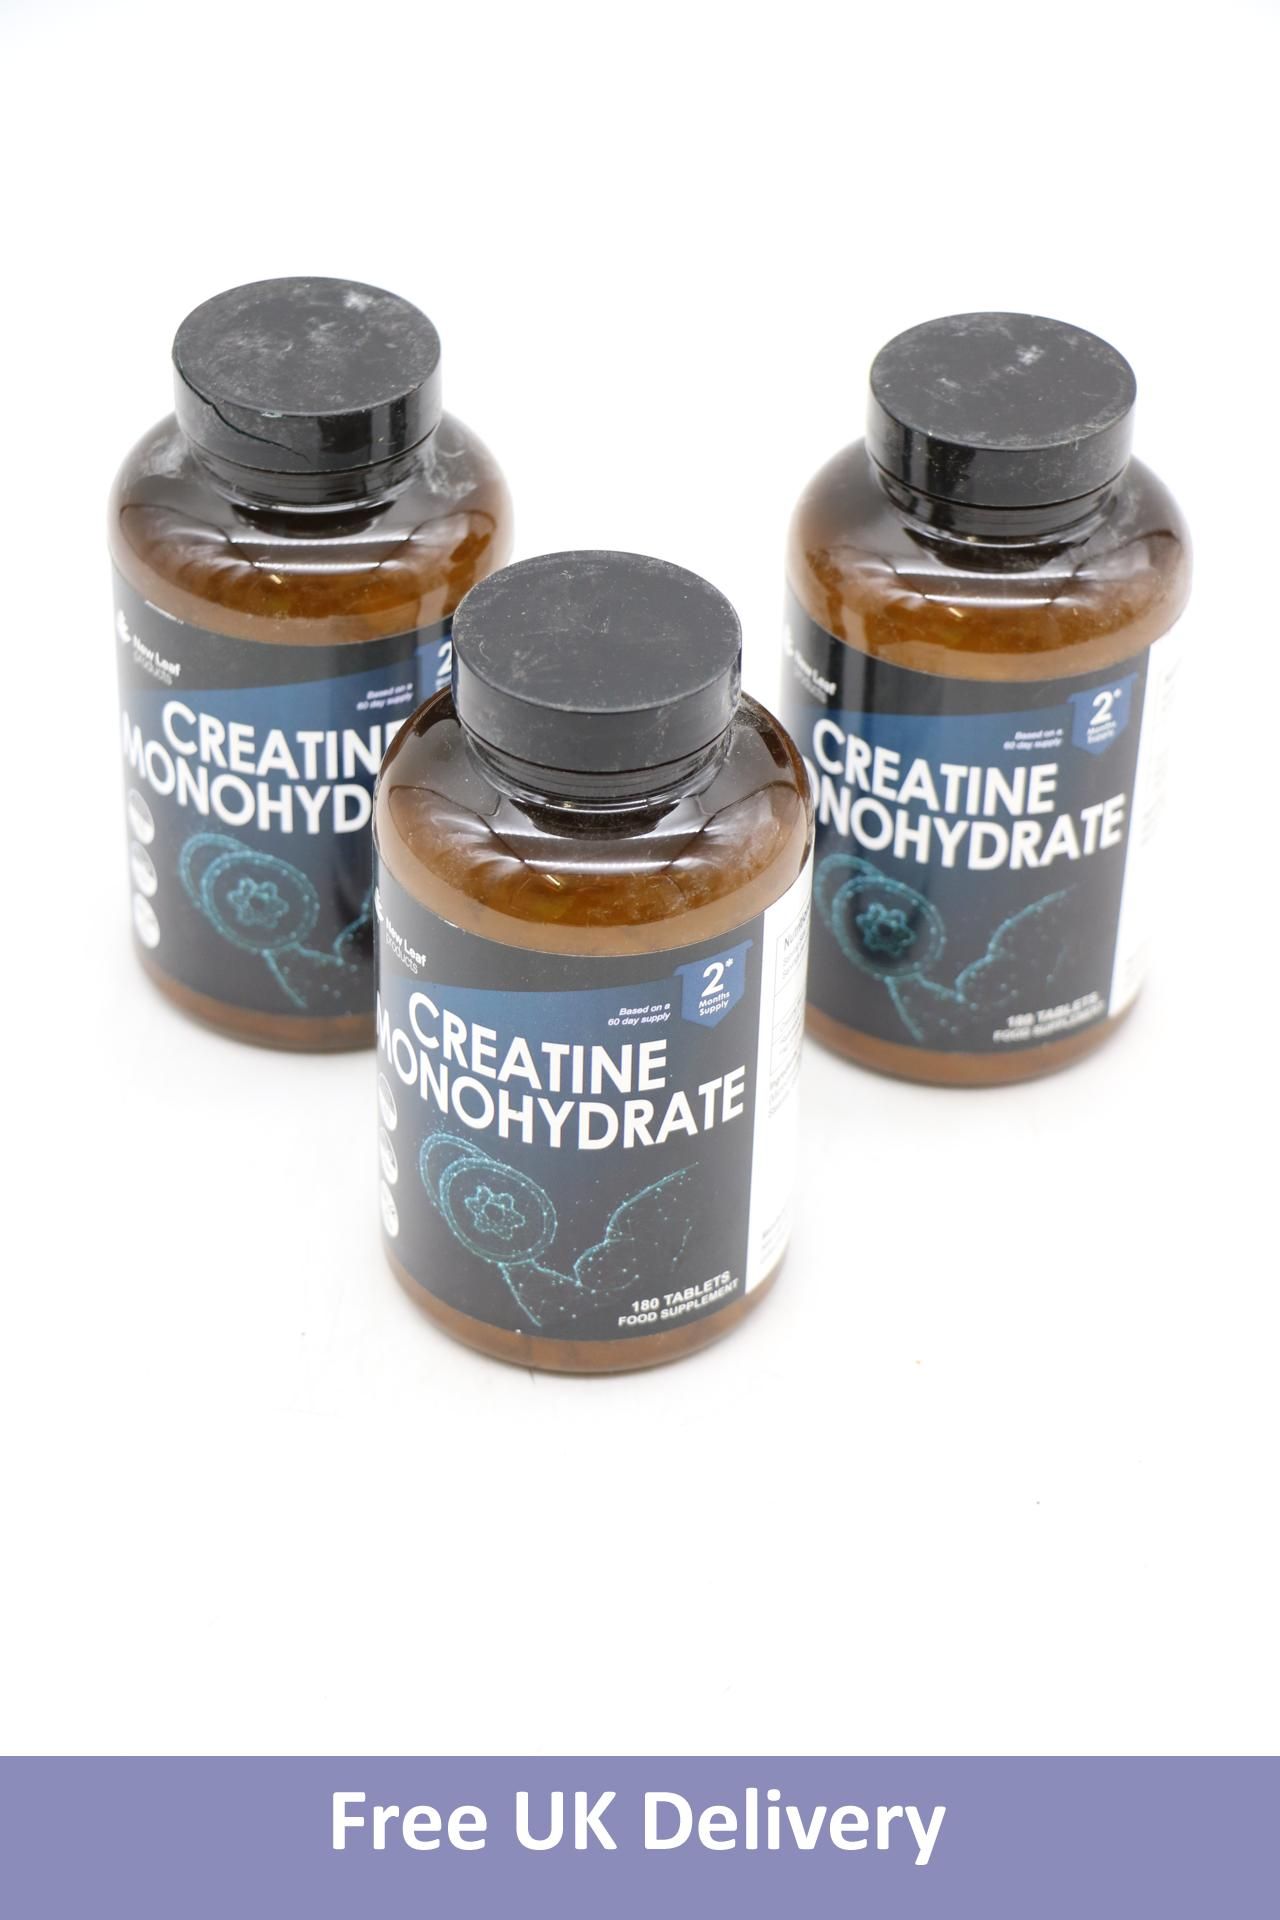 Three bottles of Creatine Monohydrate, 180 Tablets, BBE 10/26